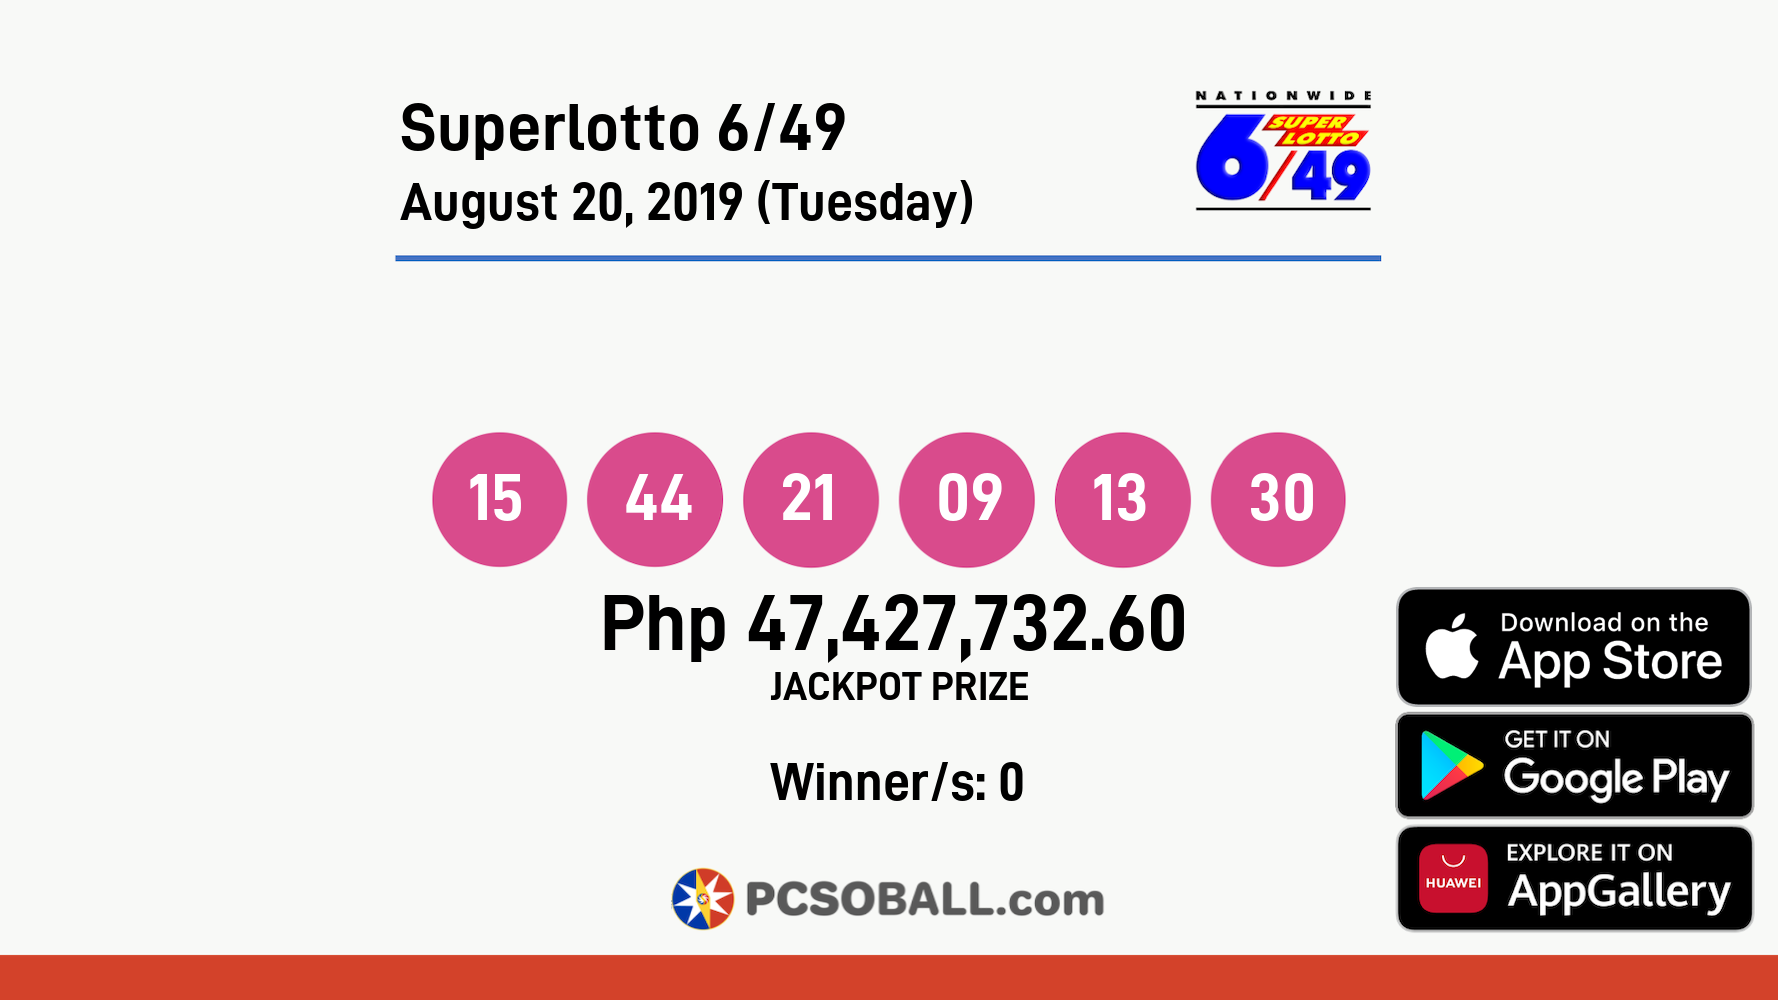 Superlotto 6/49 August 20, 2019 (Tuesday) Result